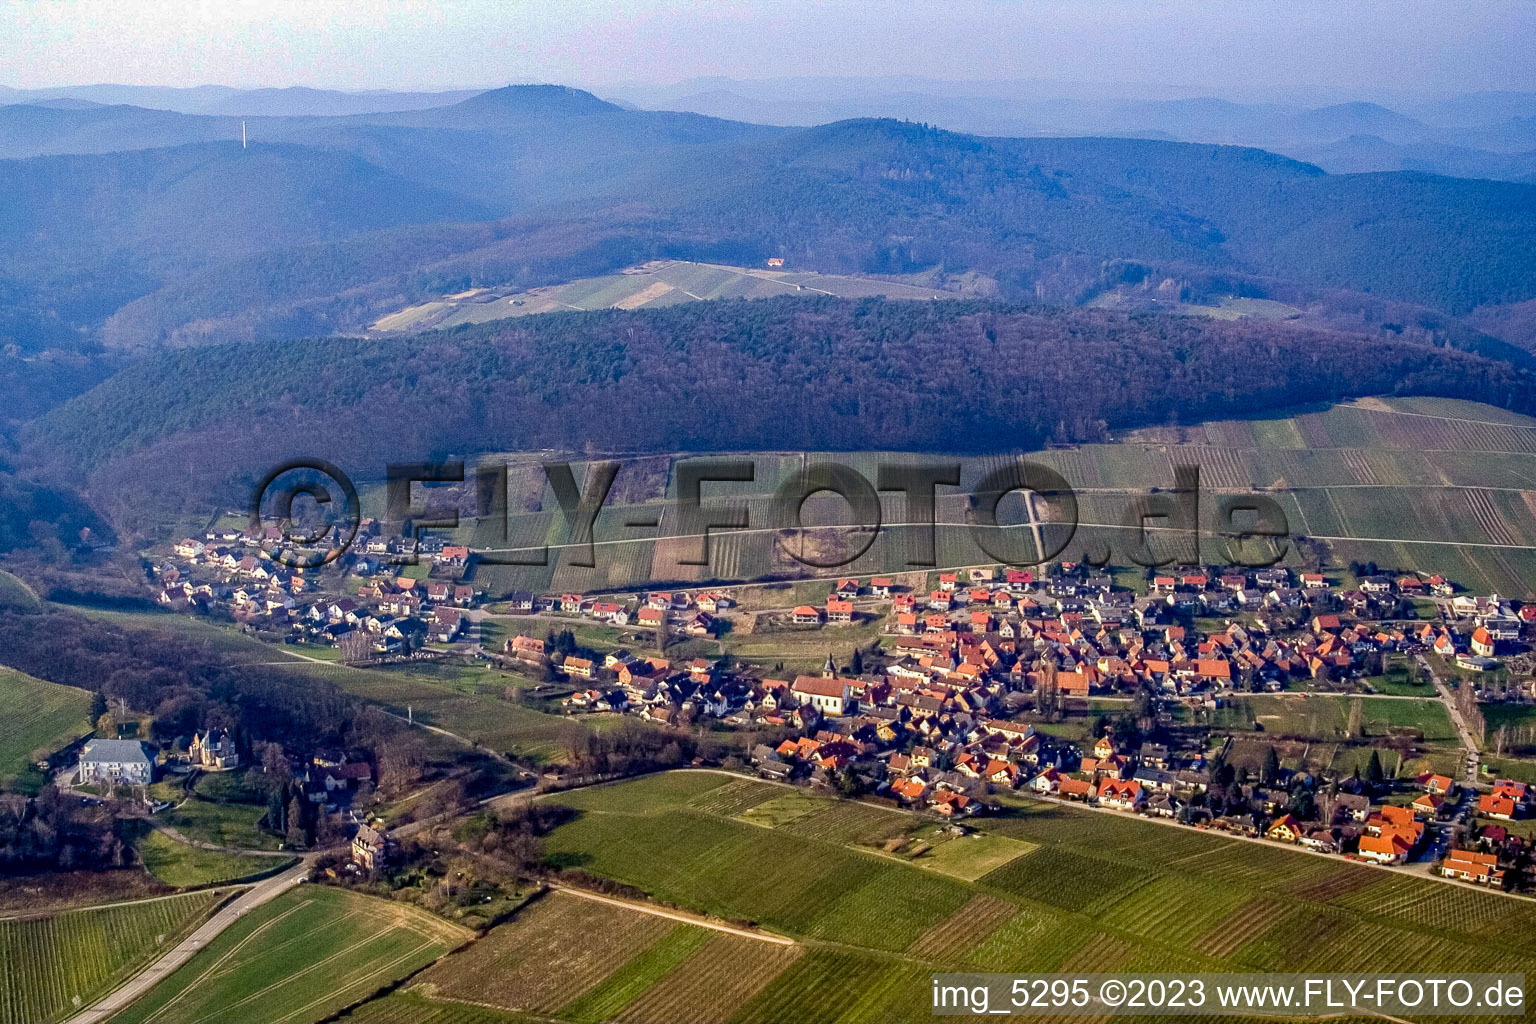 From the southeast in the district Pleisweiler in Pleisweiler-Oberhofen in the state Rhineland-Palatinate, Germany